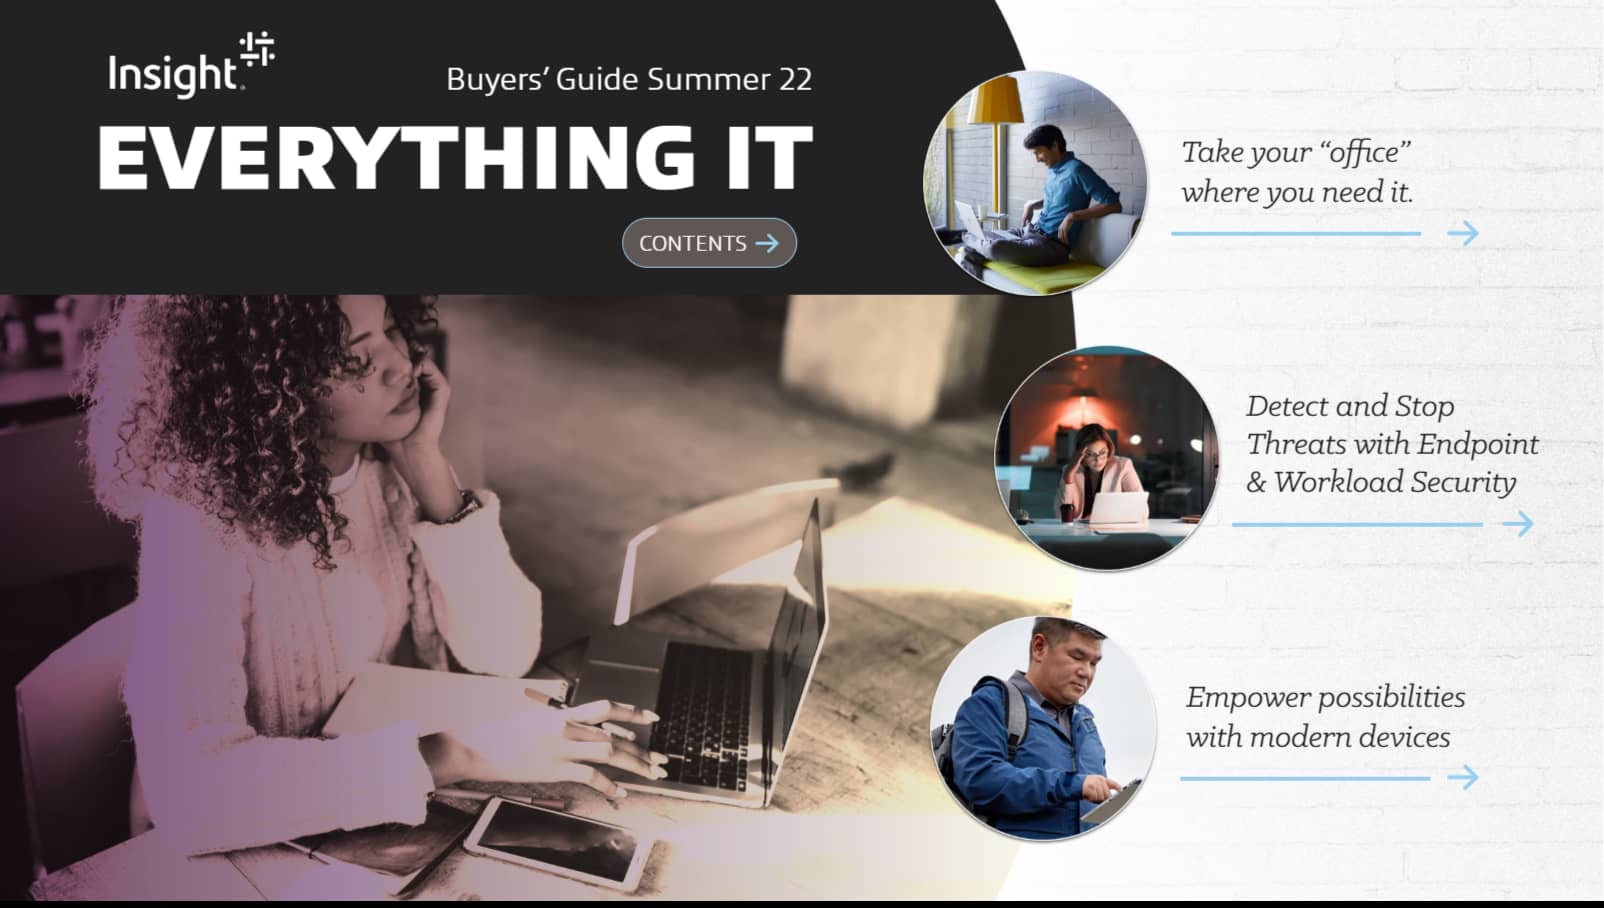 Buyers guide summer 2022